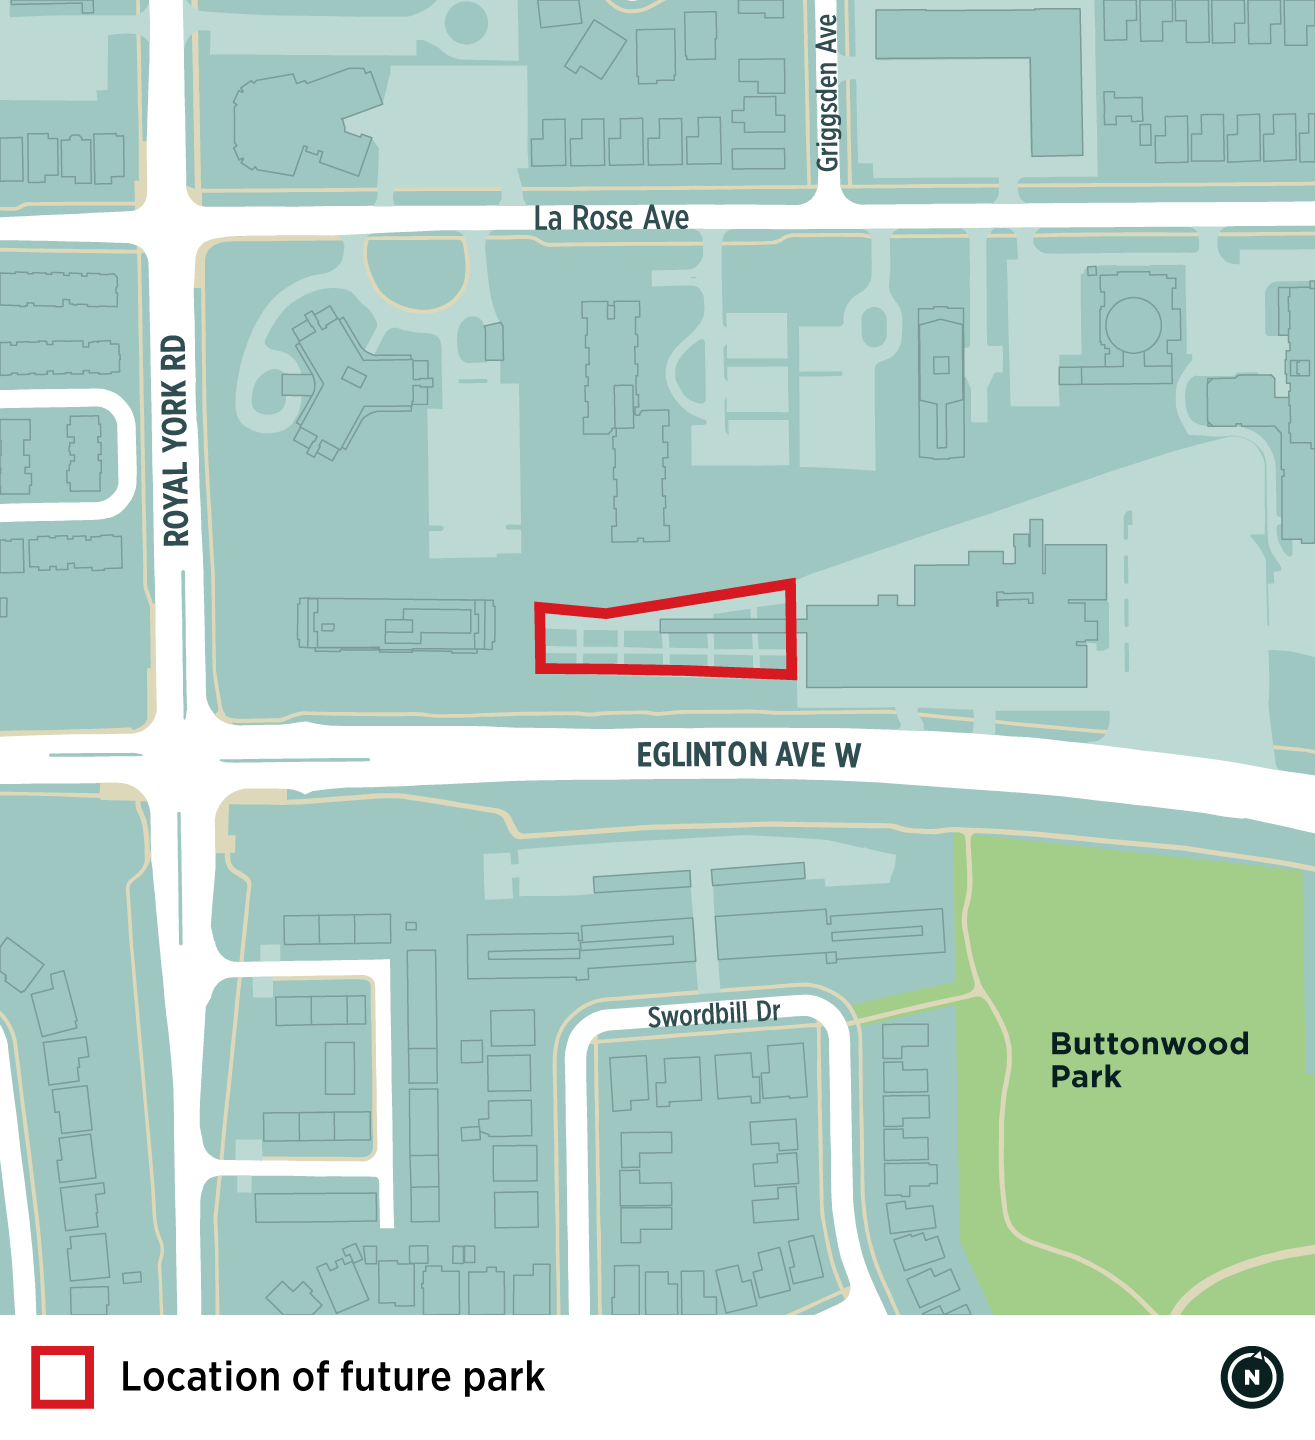 A map showing the location of the new park at 4000 Eglinton West, circled in red. The new park will be located on Eglinton Avenue West, near Royal York Road and across from Buttonwood Park. 